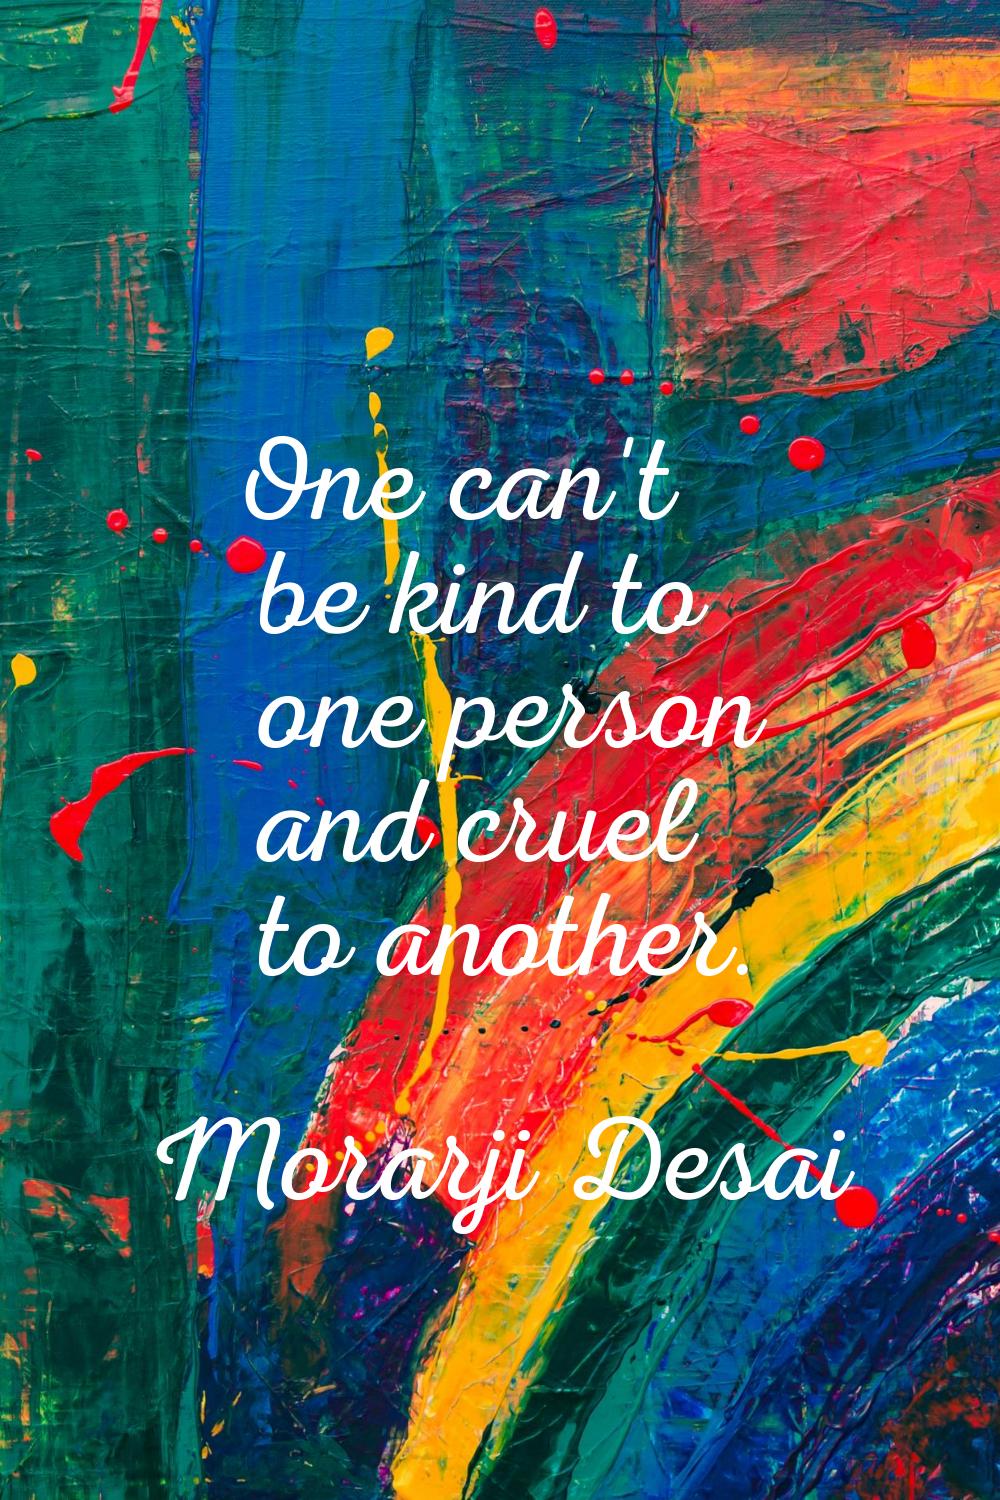 One can't be kind to one person and cruel to another.